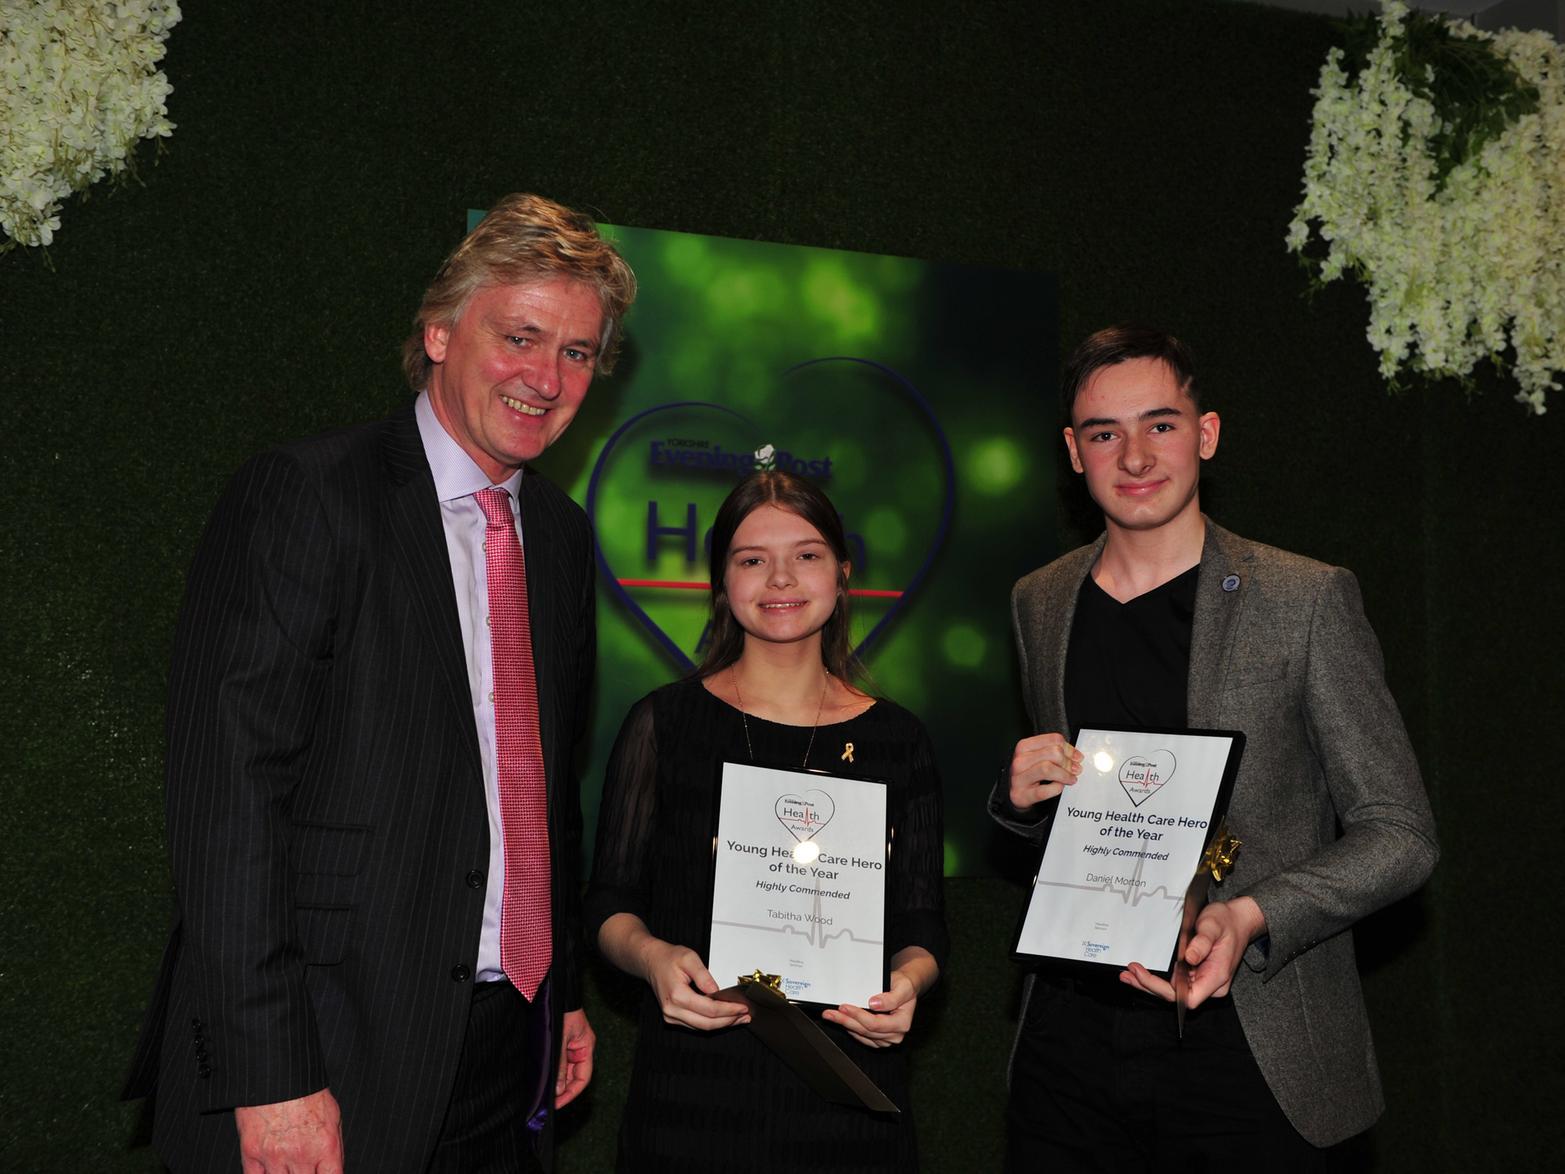 Young Healthcare Heroes: Tabitha Wood and Daniel Morton, who were highly commended in the YEP Health Awards 2019, with their certificates, which were presented by Russ Piper, chief executive of main health awards sponsor Sovereign Health Care.